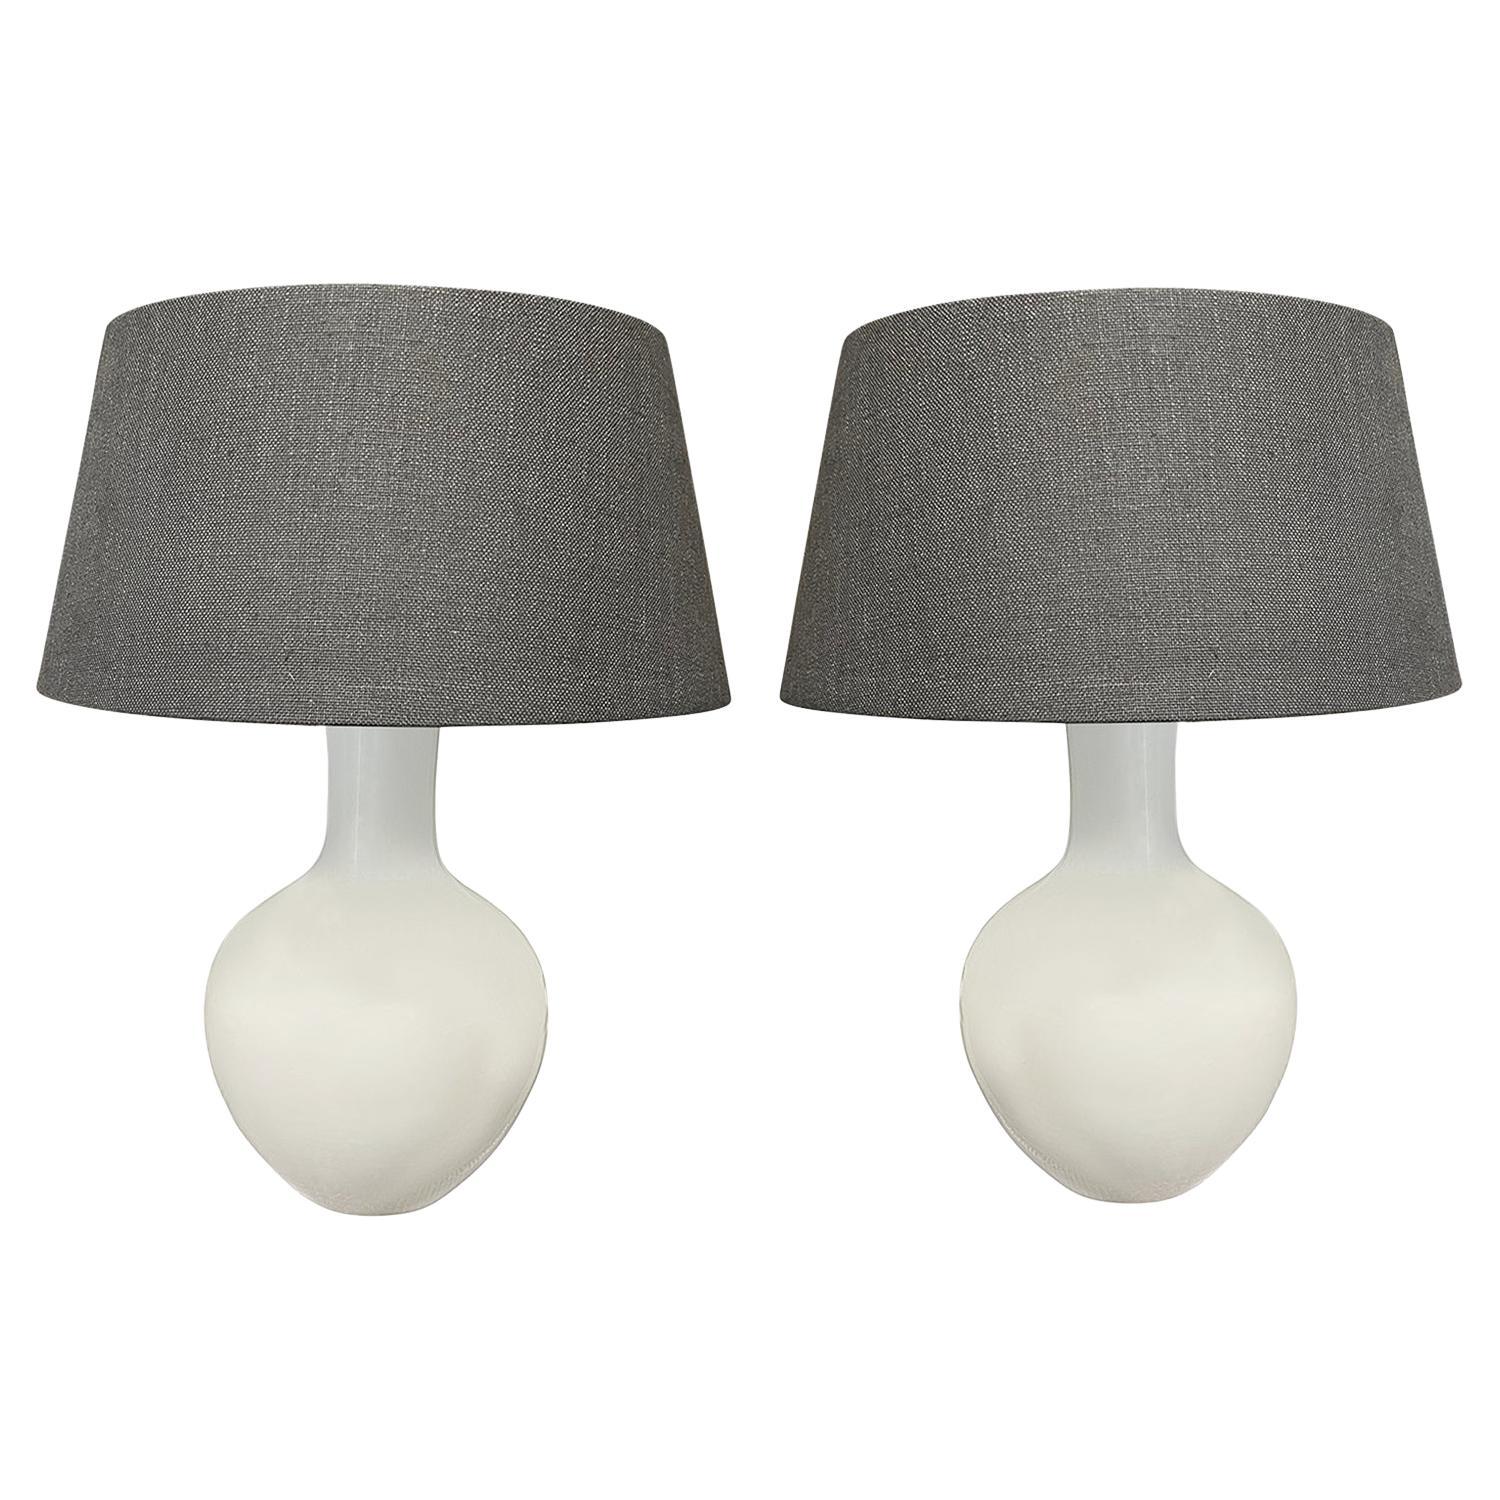 White Funnel Neck Shaped Pair Of Lamps With Shades, China, Contemporary For Sale